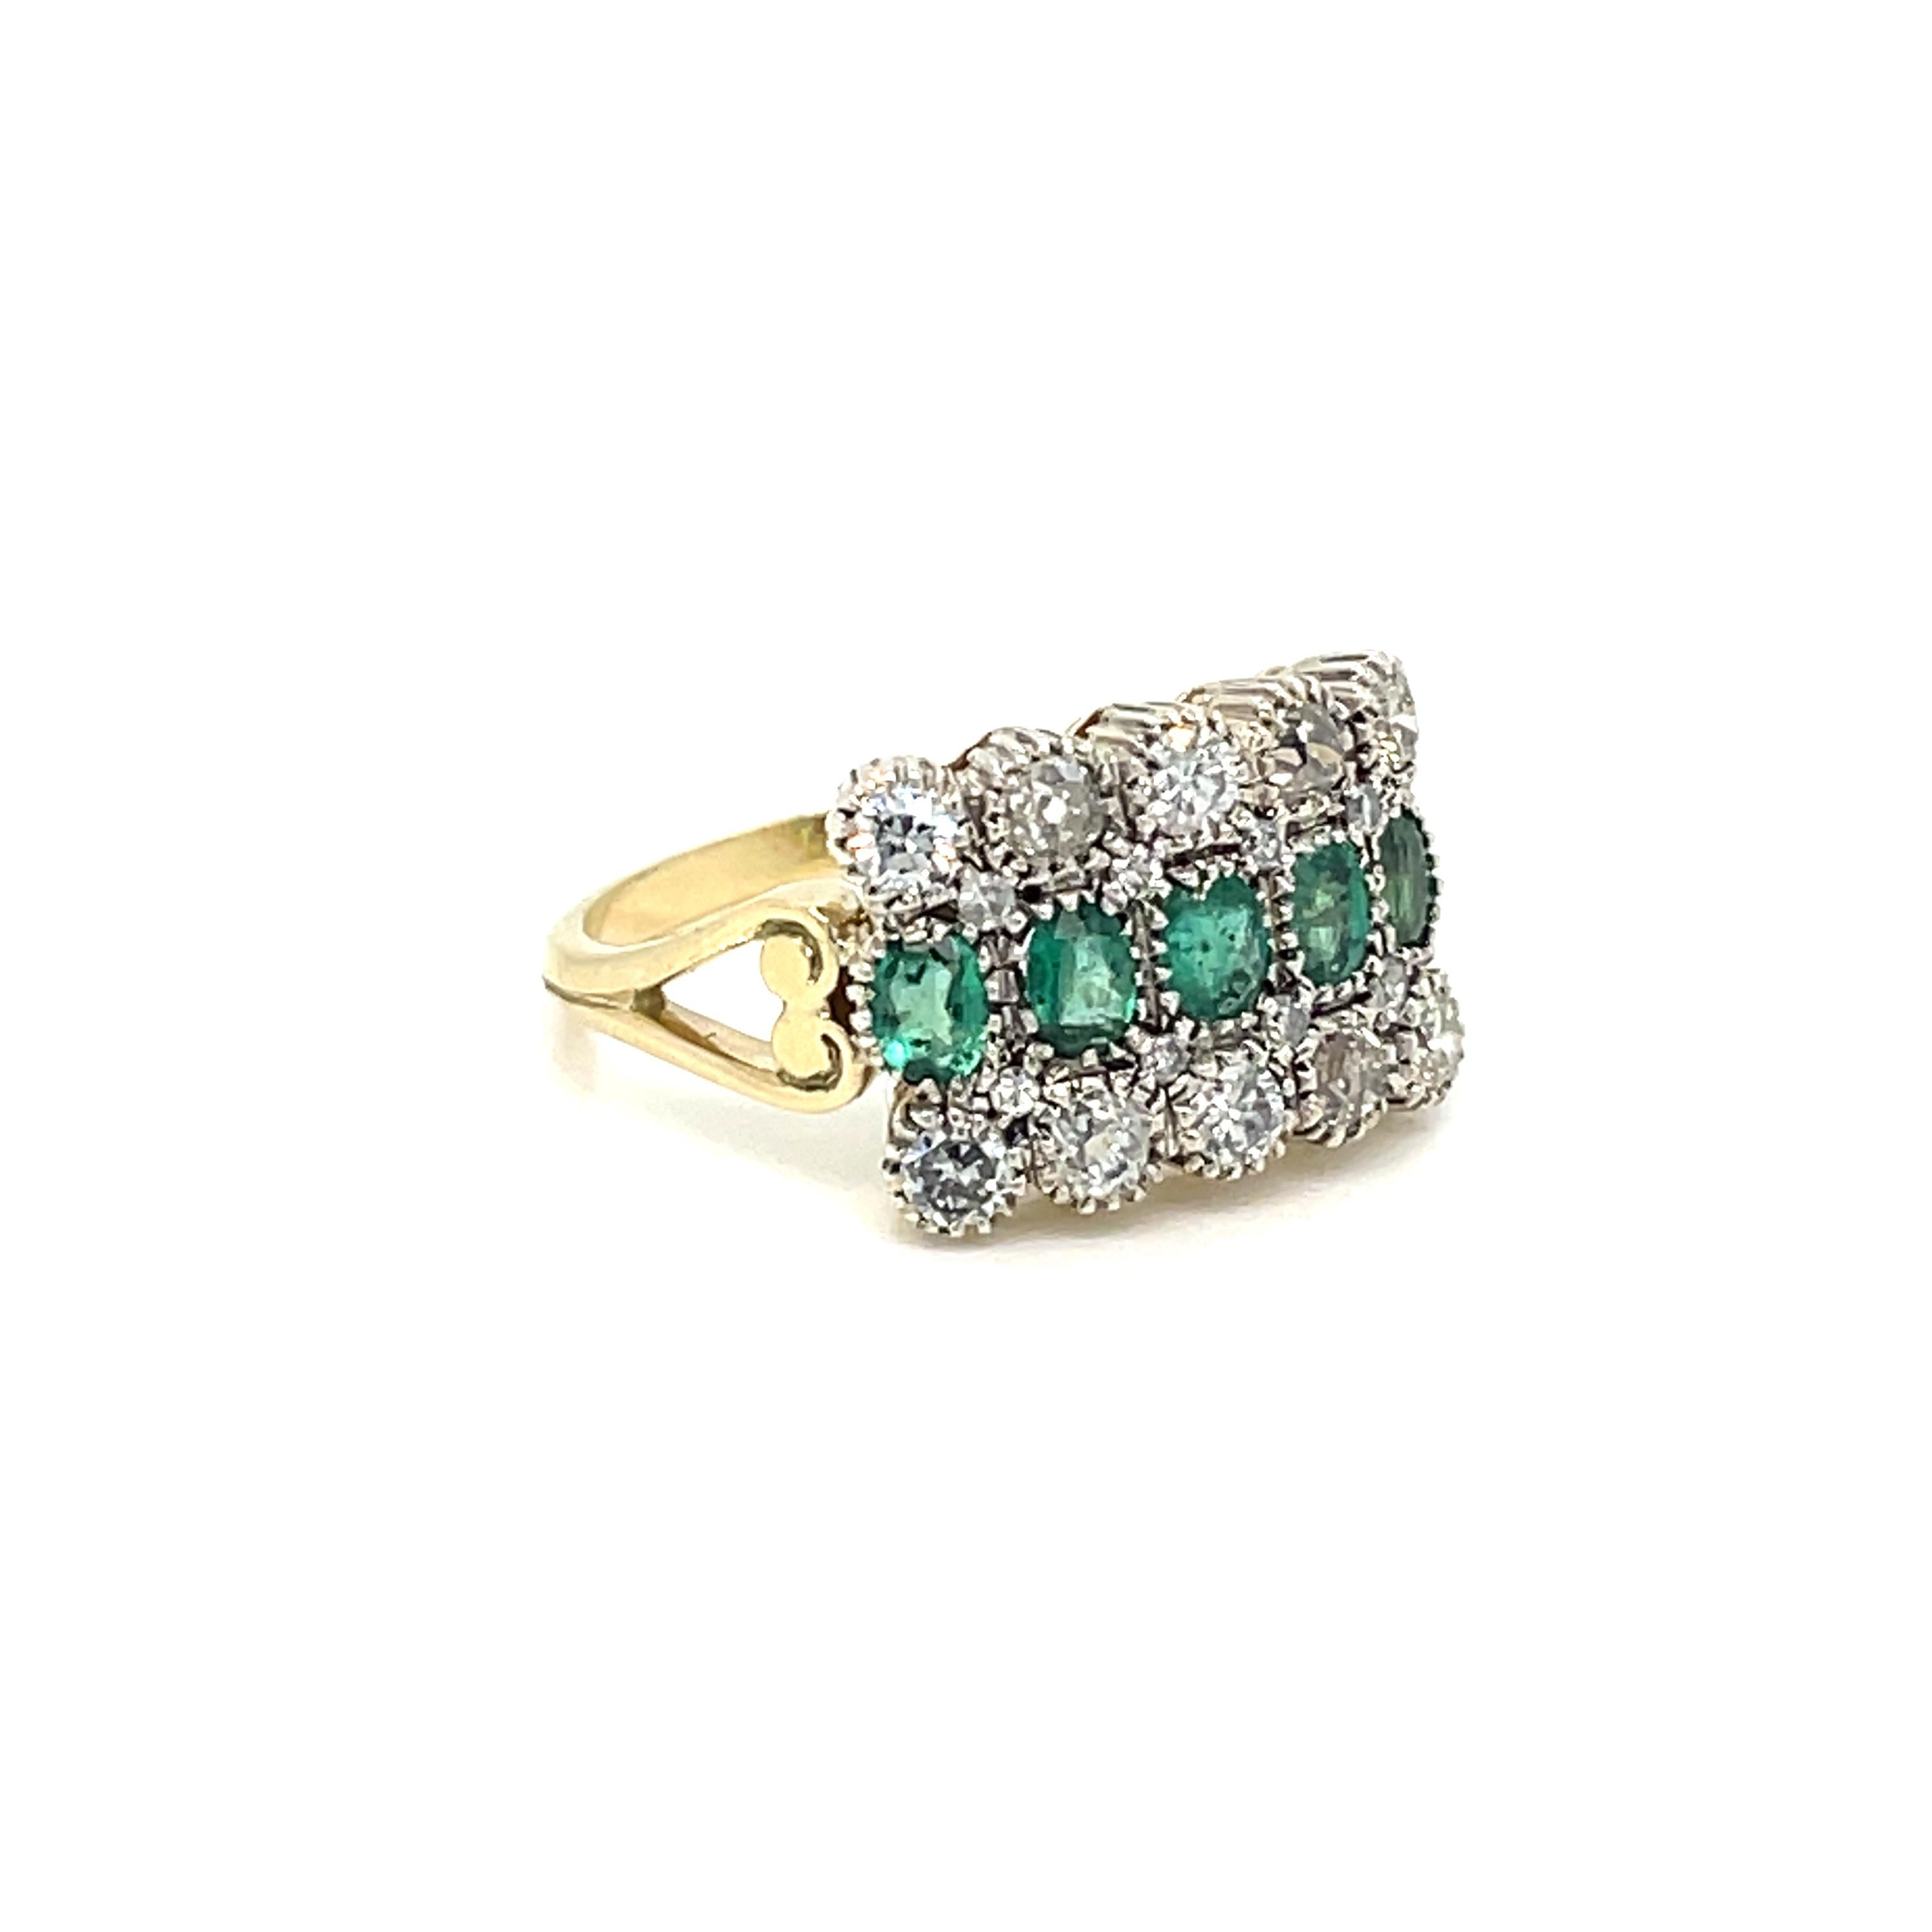 Beautiful 14k Gold handmade genuine Belle Époque ring.
It features two rows of Old mine cut diamond, weight 0,70 ct., and in the center a row of fine oval shaped natural Emerald, total weight 0,70 ct.

Circa 1900'

CONDITION: Pre-owned - Excellent